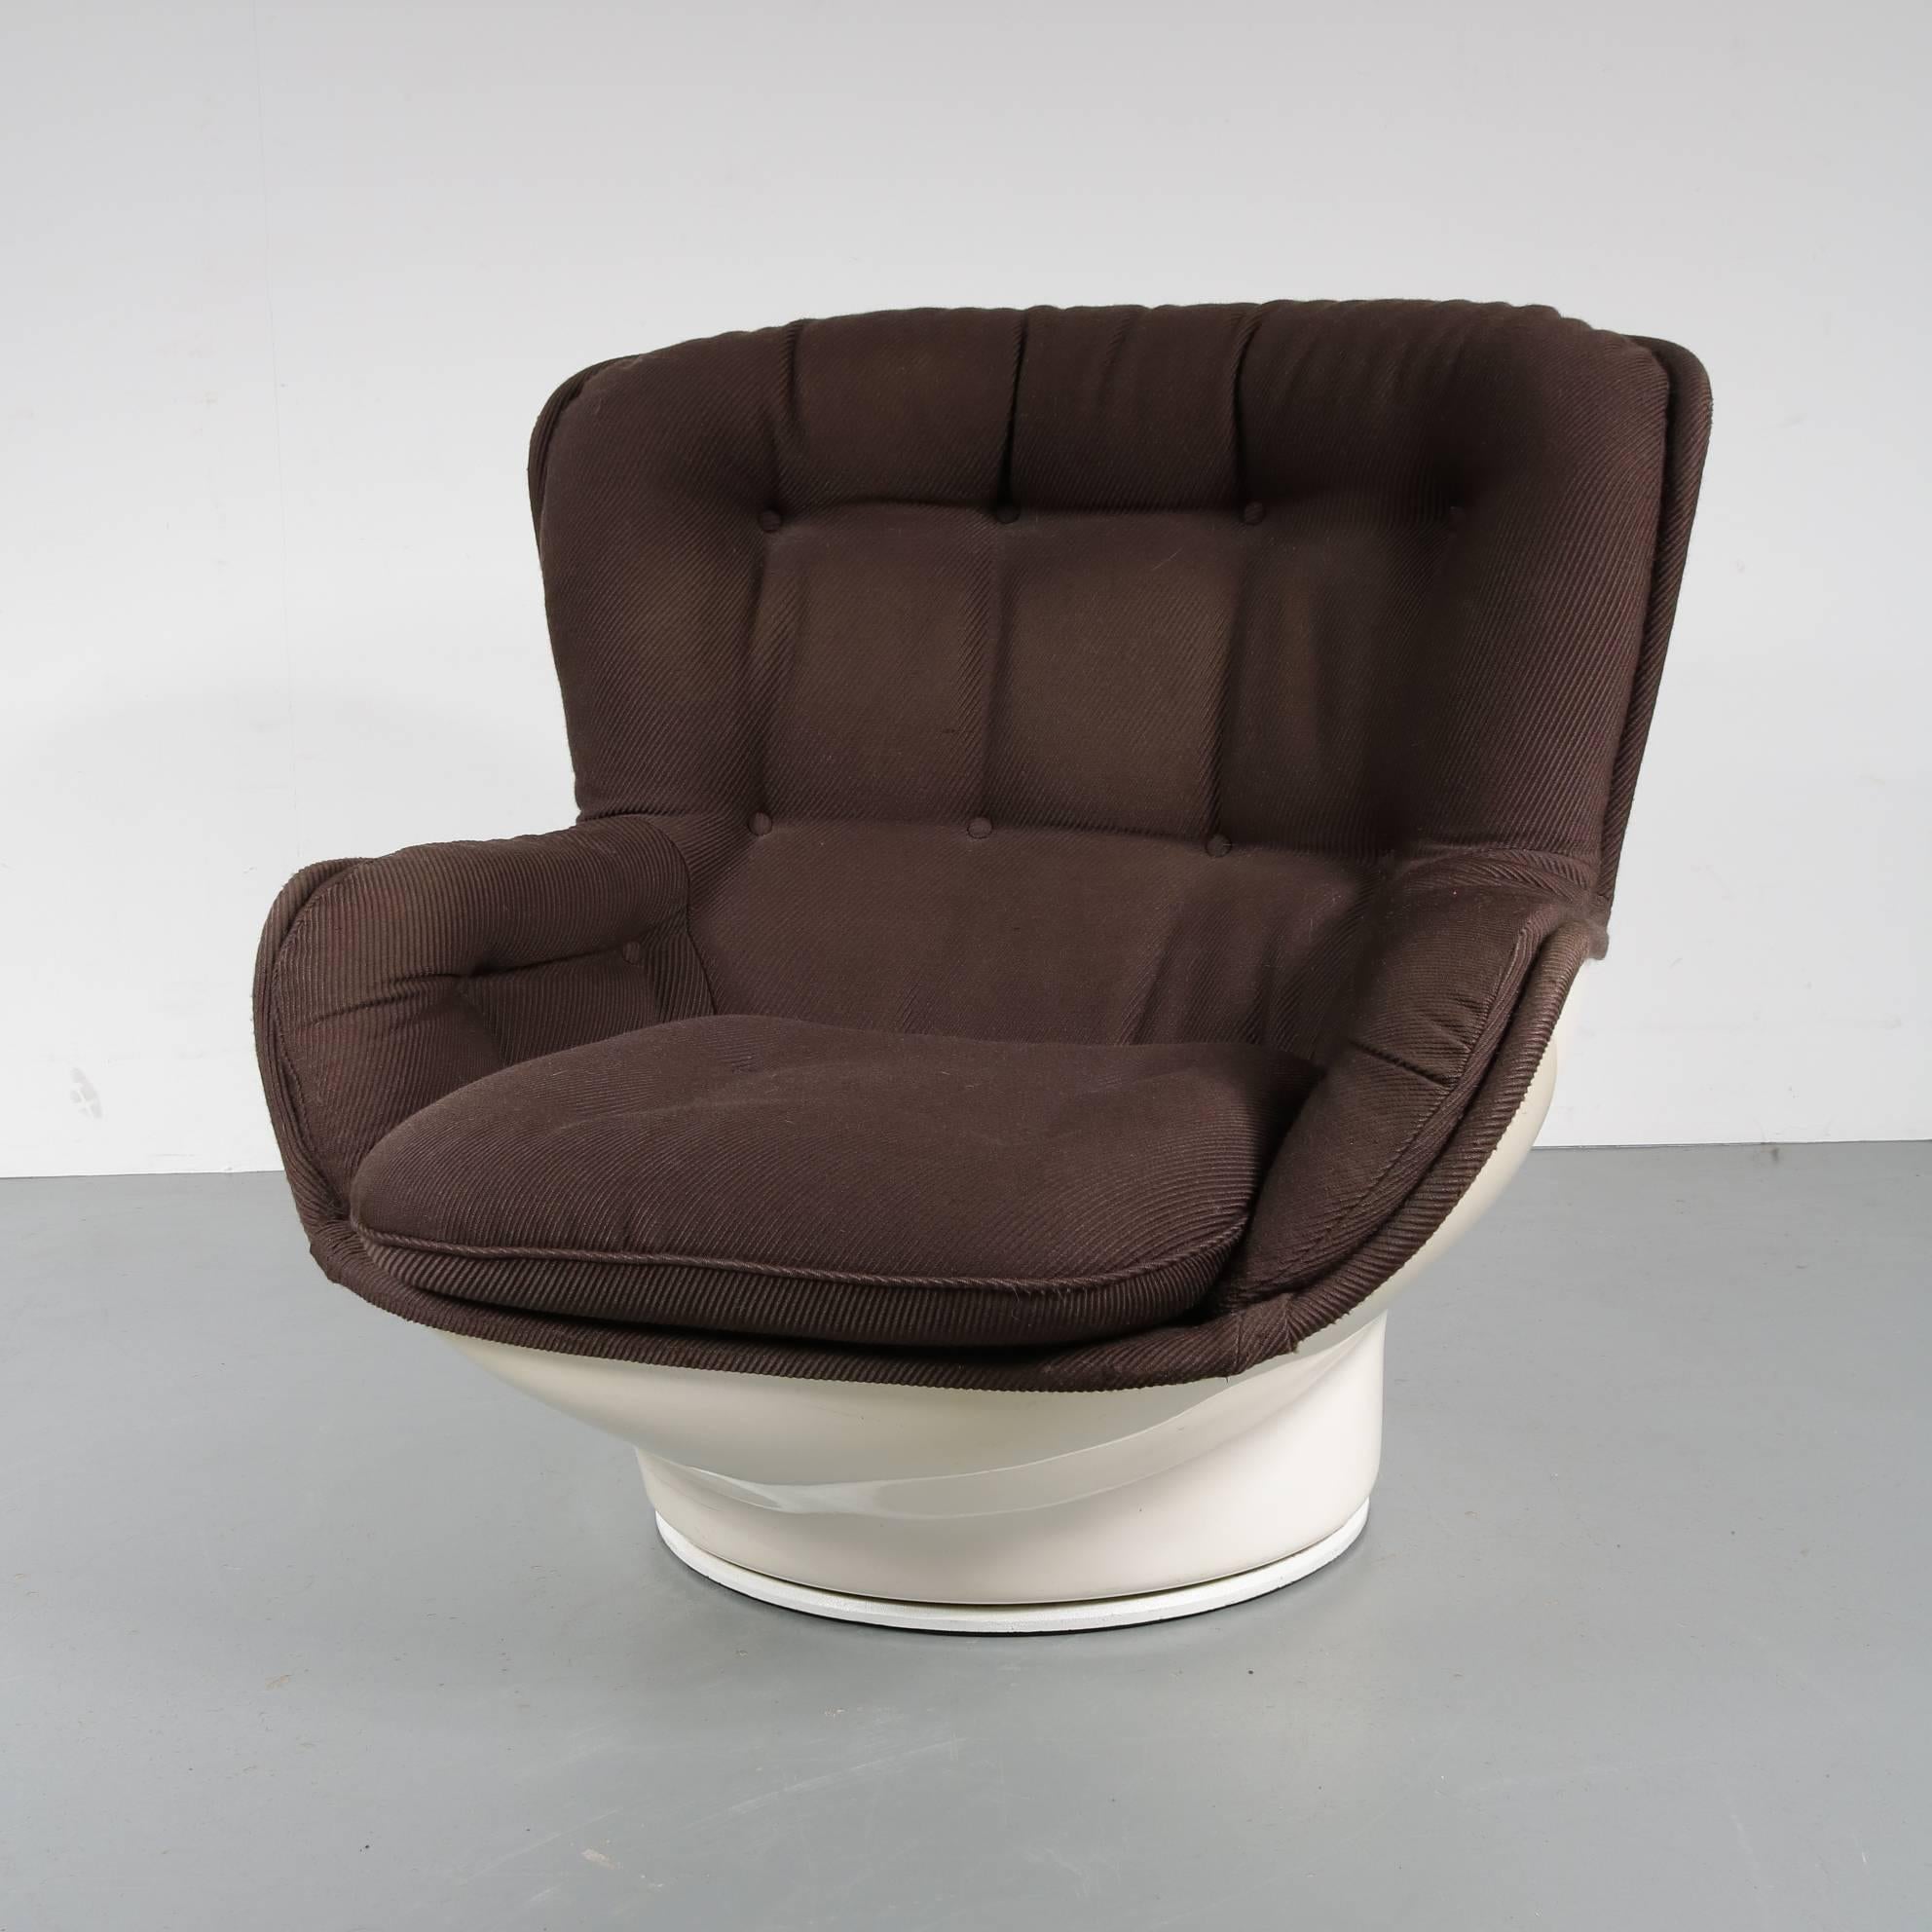 An eye-catching Karate Chair designed by Michel Cadestin, manufactured by Airborne in France around 1970.

This stunning and rare chair is made of high quality white fiberglass with the original brown corduroy upholstery. This combination of